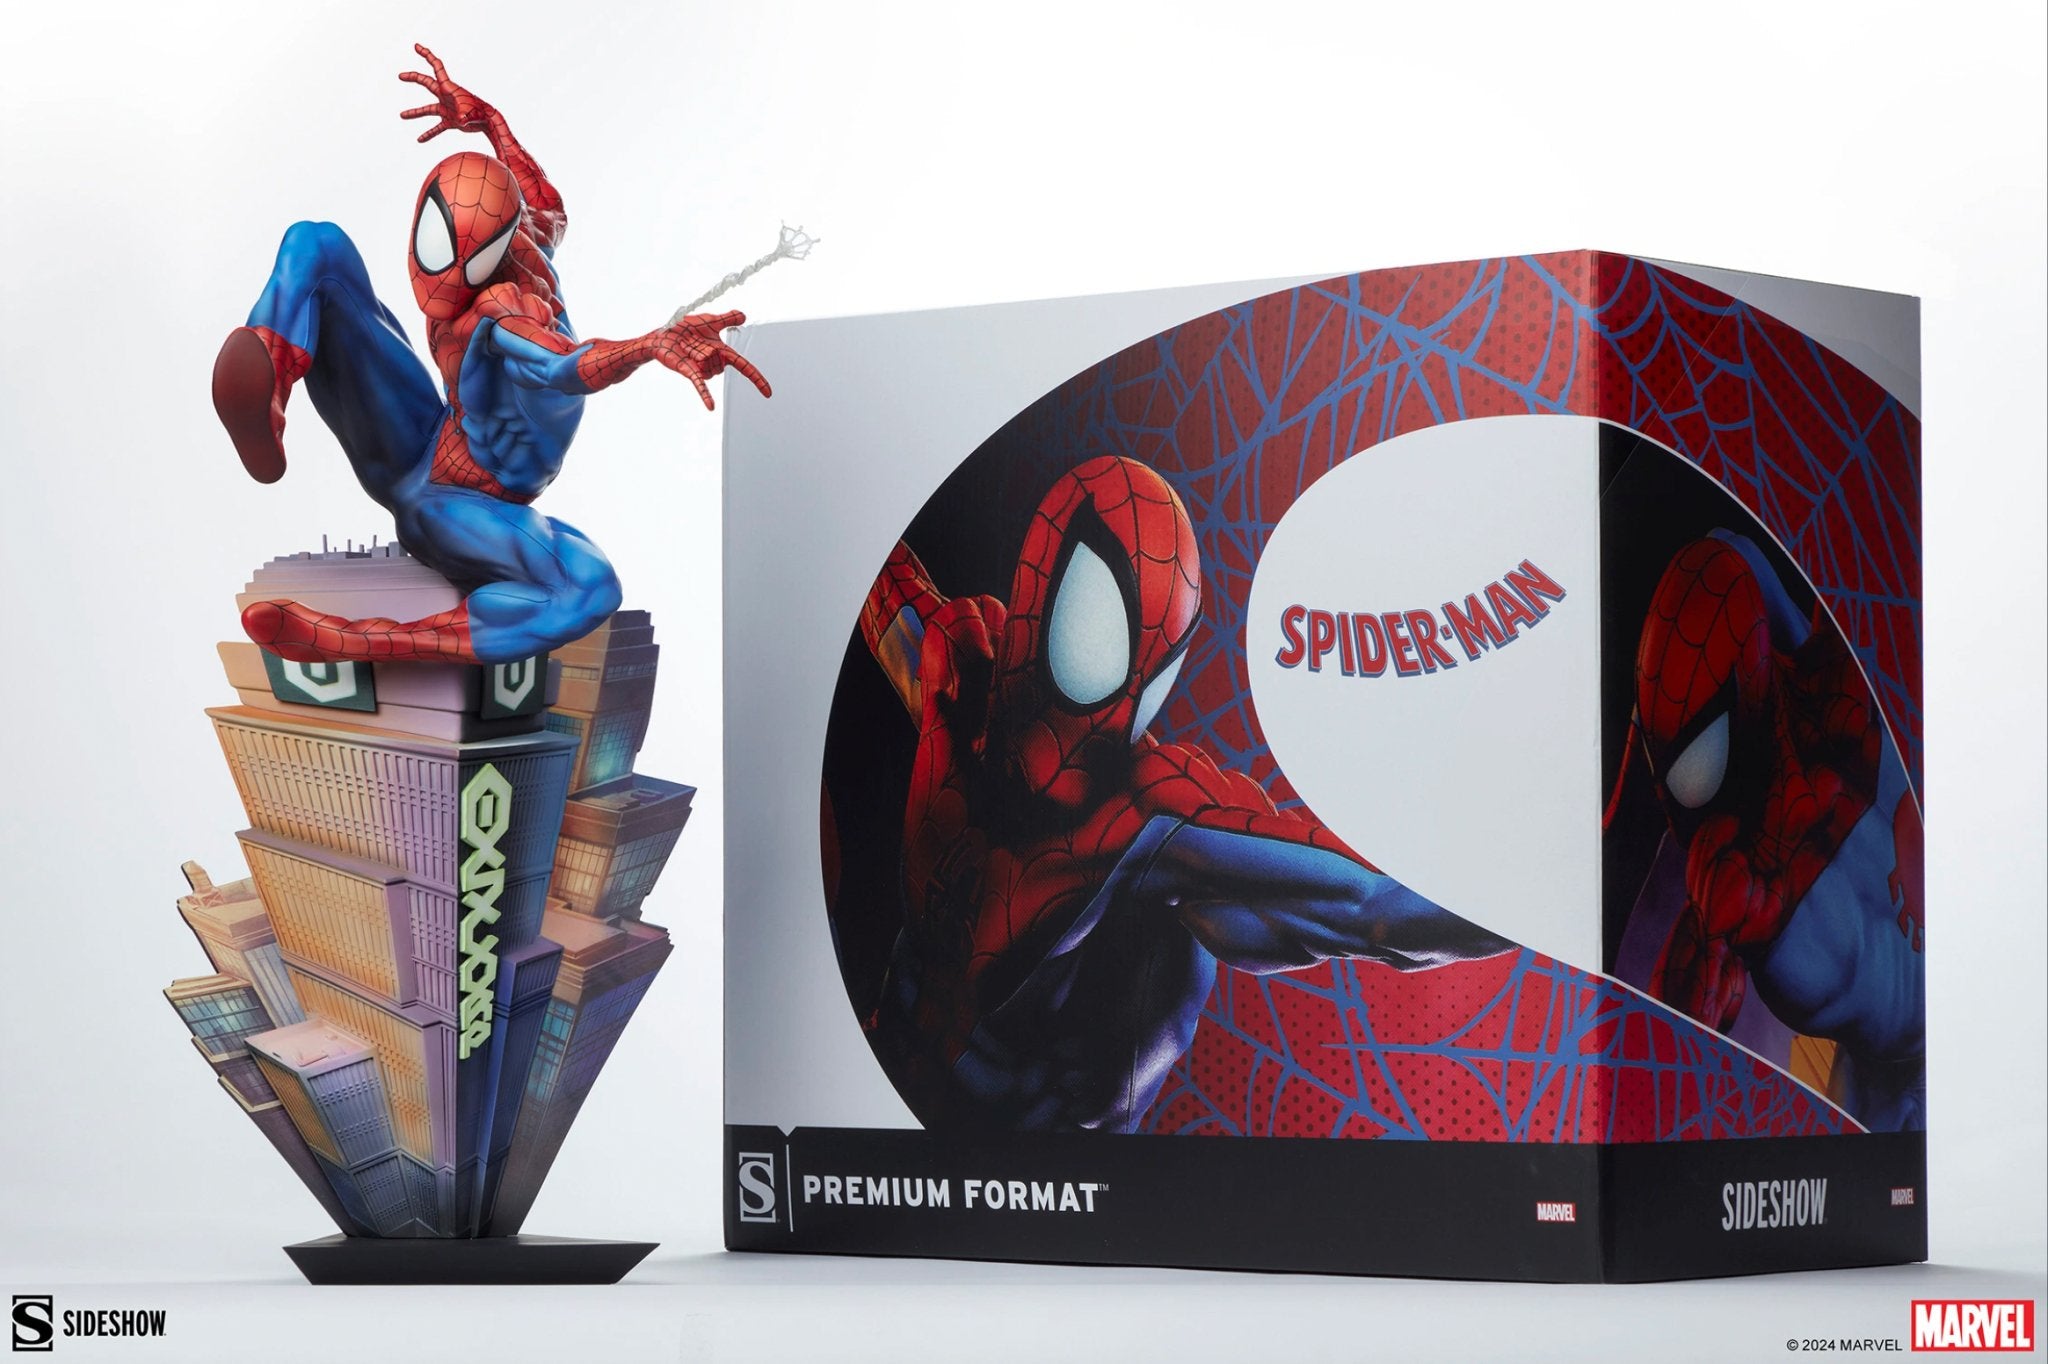 Spider-Man Premium Format™ Figure by Sideshow Collectibles | Zombie.co.uk - Zombie